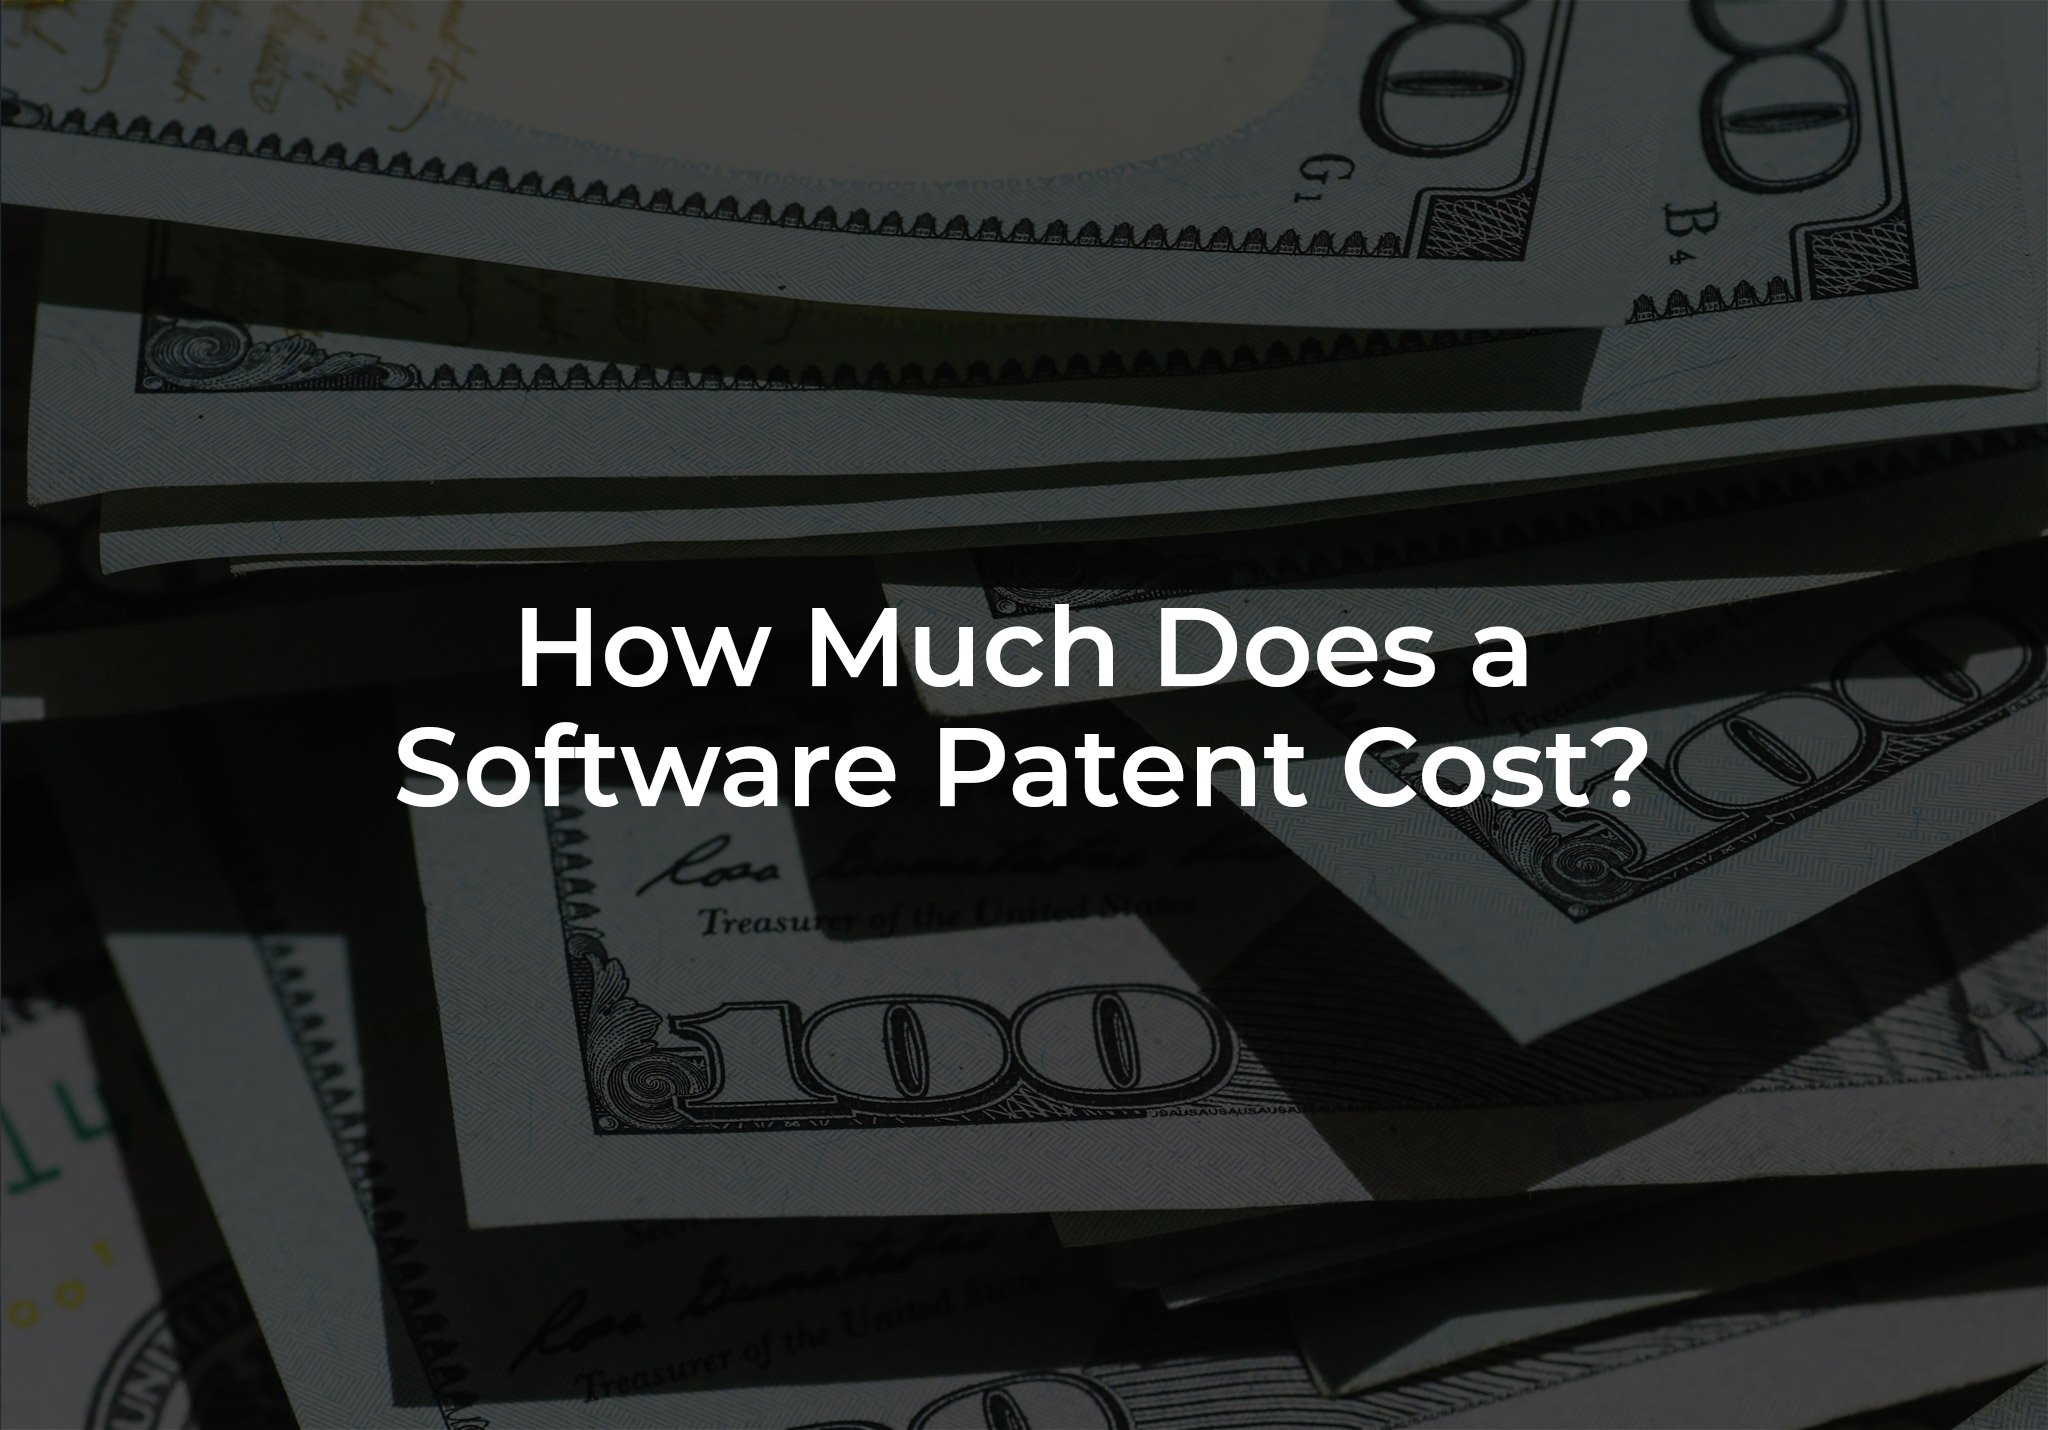 How Much Does a Software Patent Cost in 2021?